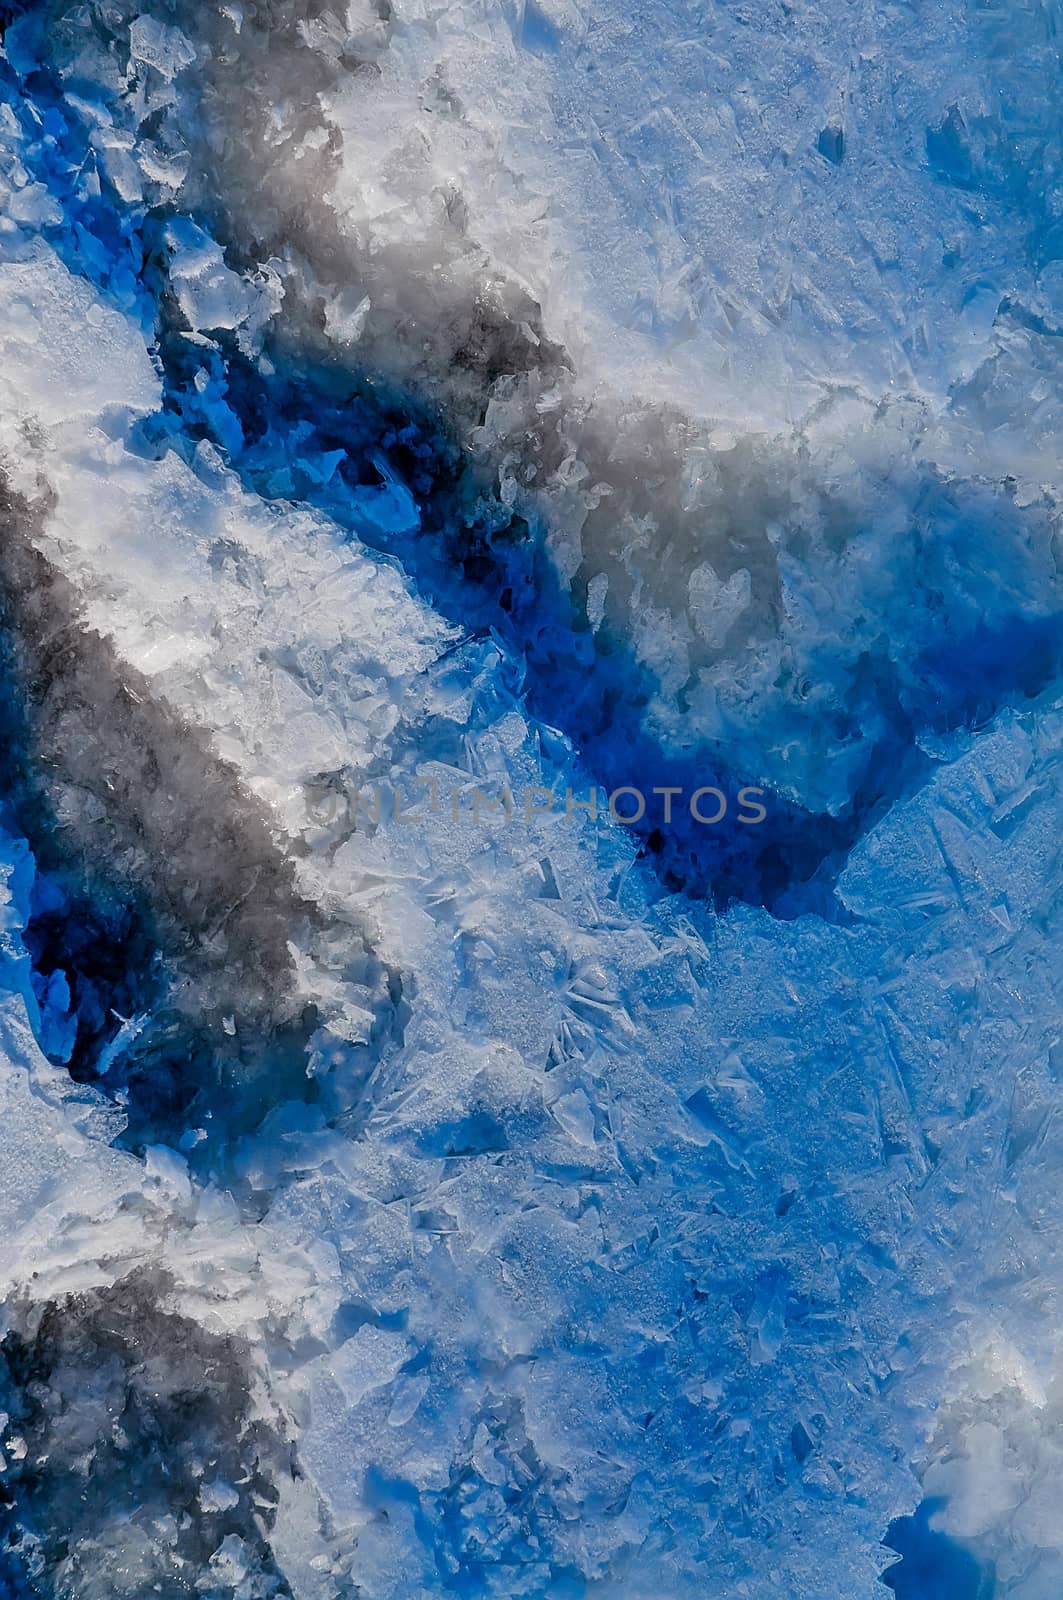 Detail of the frozen river Dnieper in Kiev capitol of Ukraine, snow, ice and water creating a nice colors effect